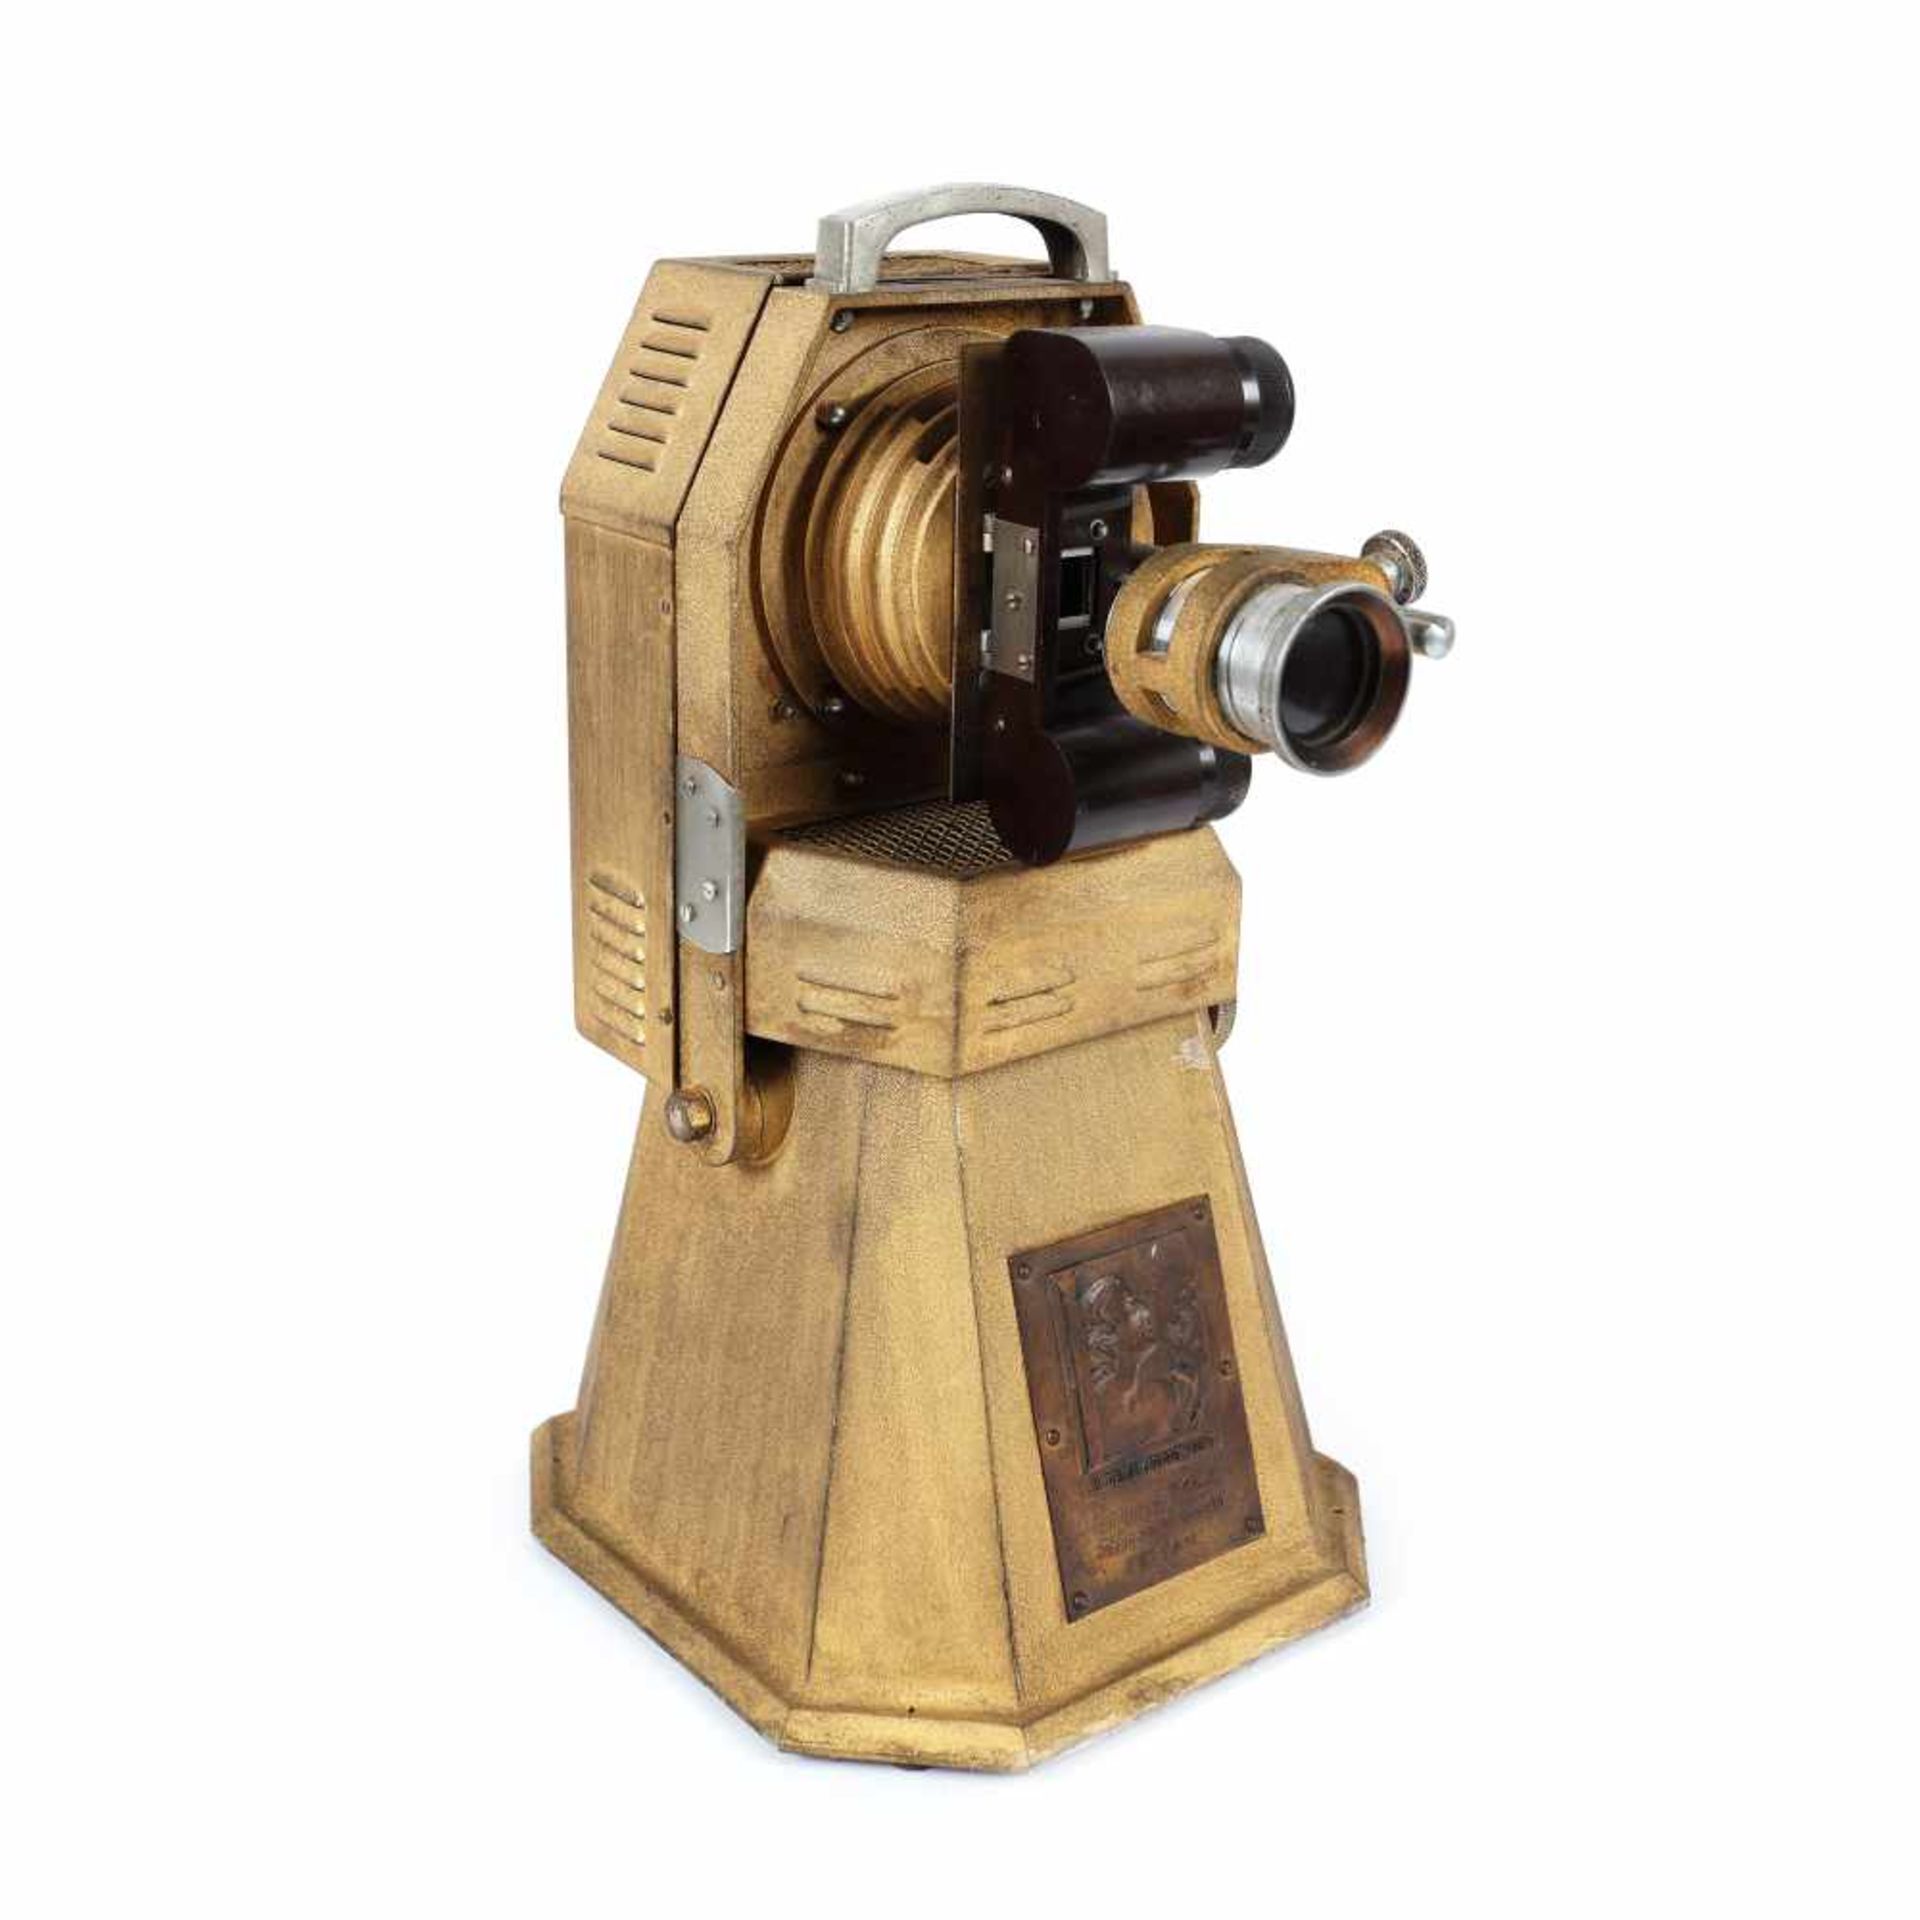 Projector for Lafayette Galleries (Victoria Store), early 20th century, original box - Image 4 of 5